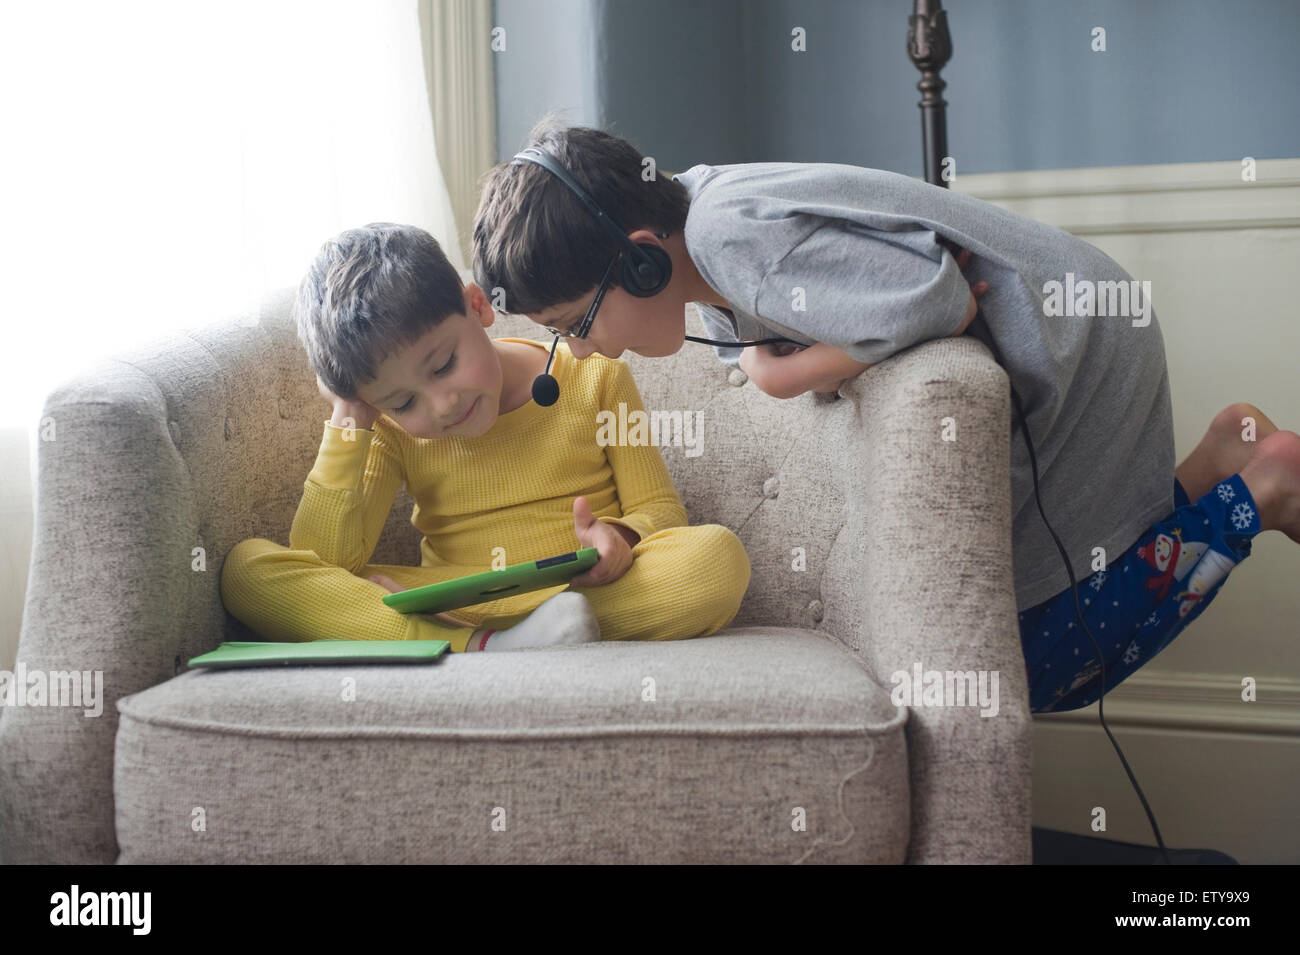 Brothers, ages 5 and 8 look at videos on Ipad mini Model Released / MR Stock Photo